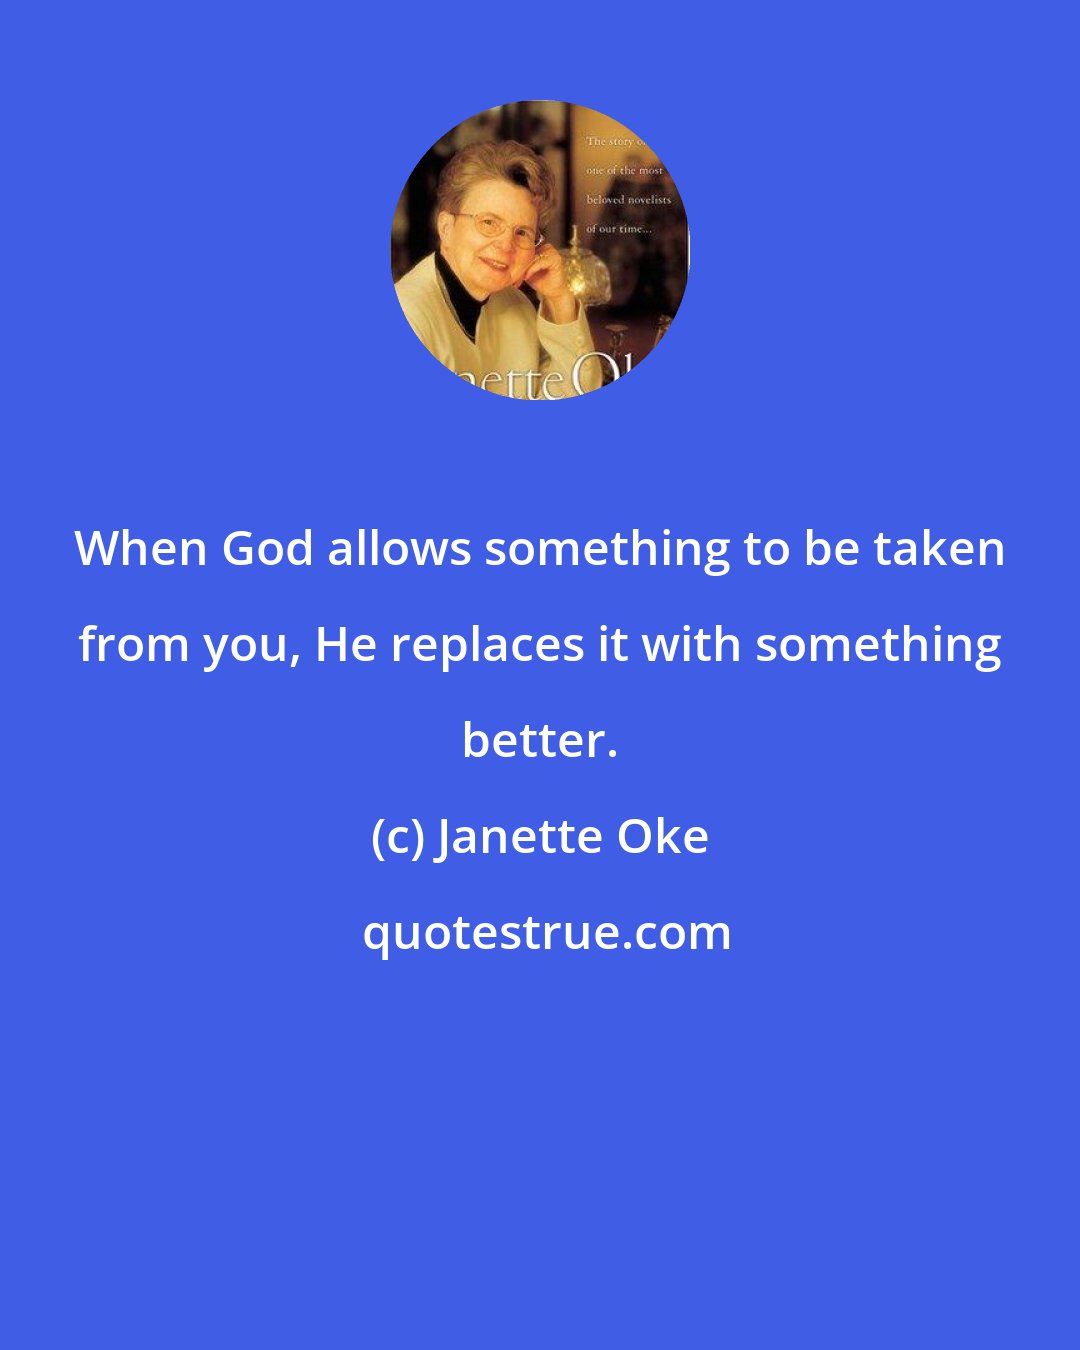 Janette Oke: When God allows something to be taken from you, He replaces it with something better.